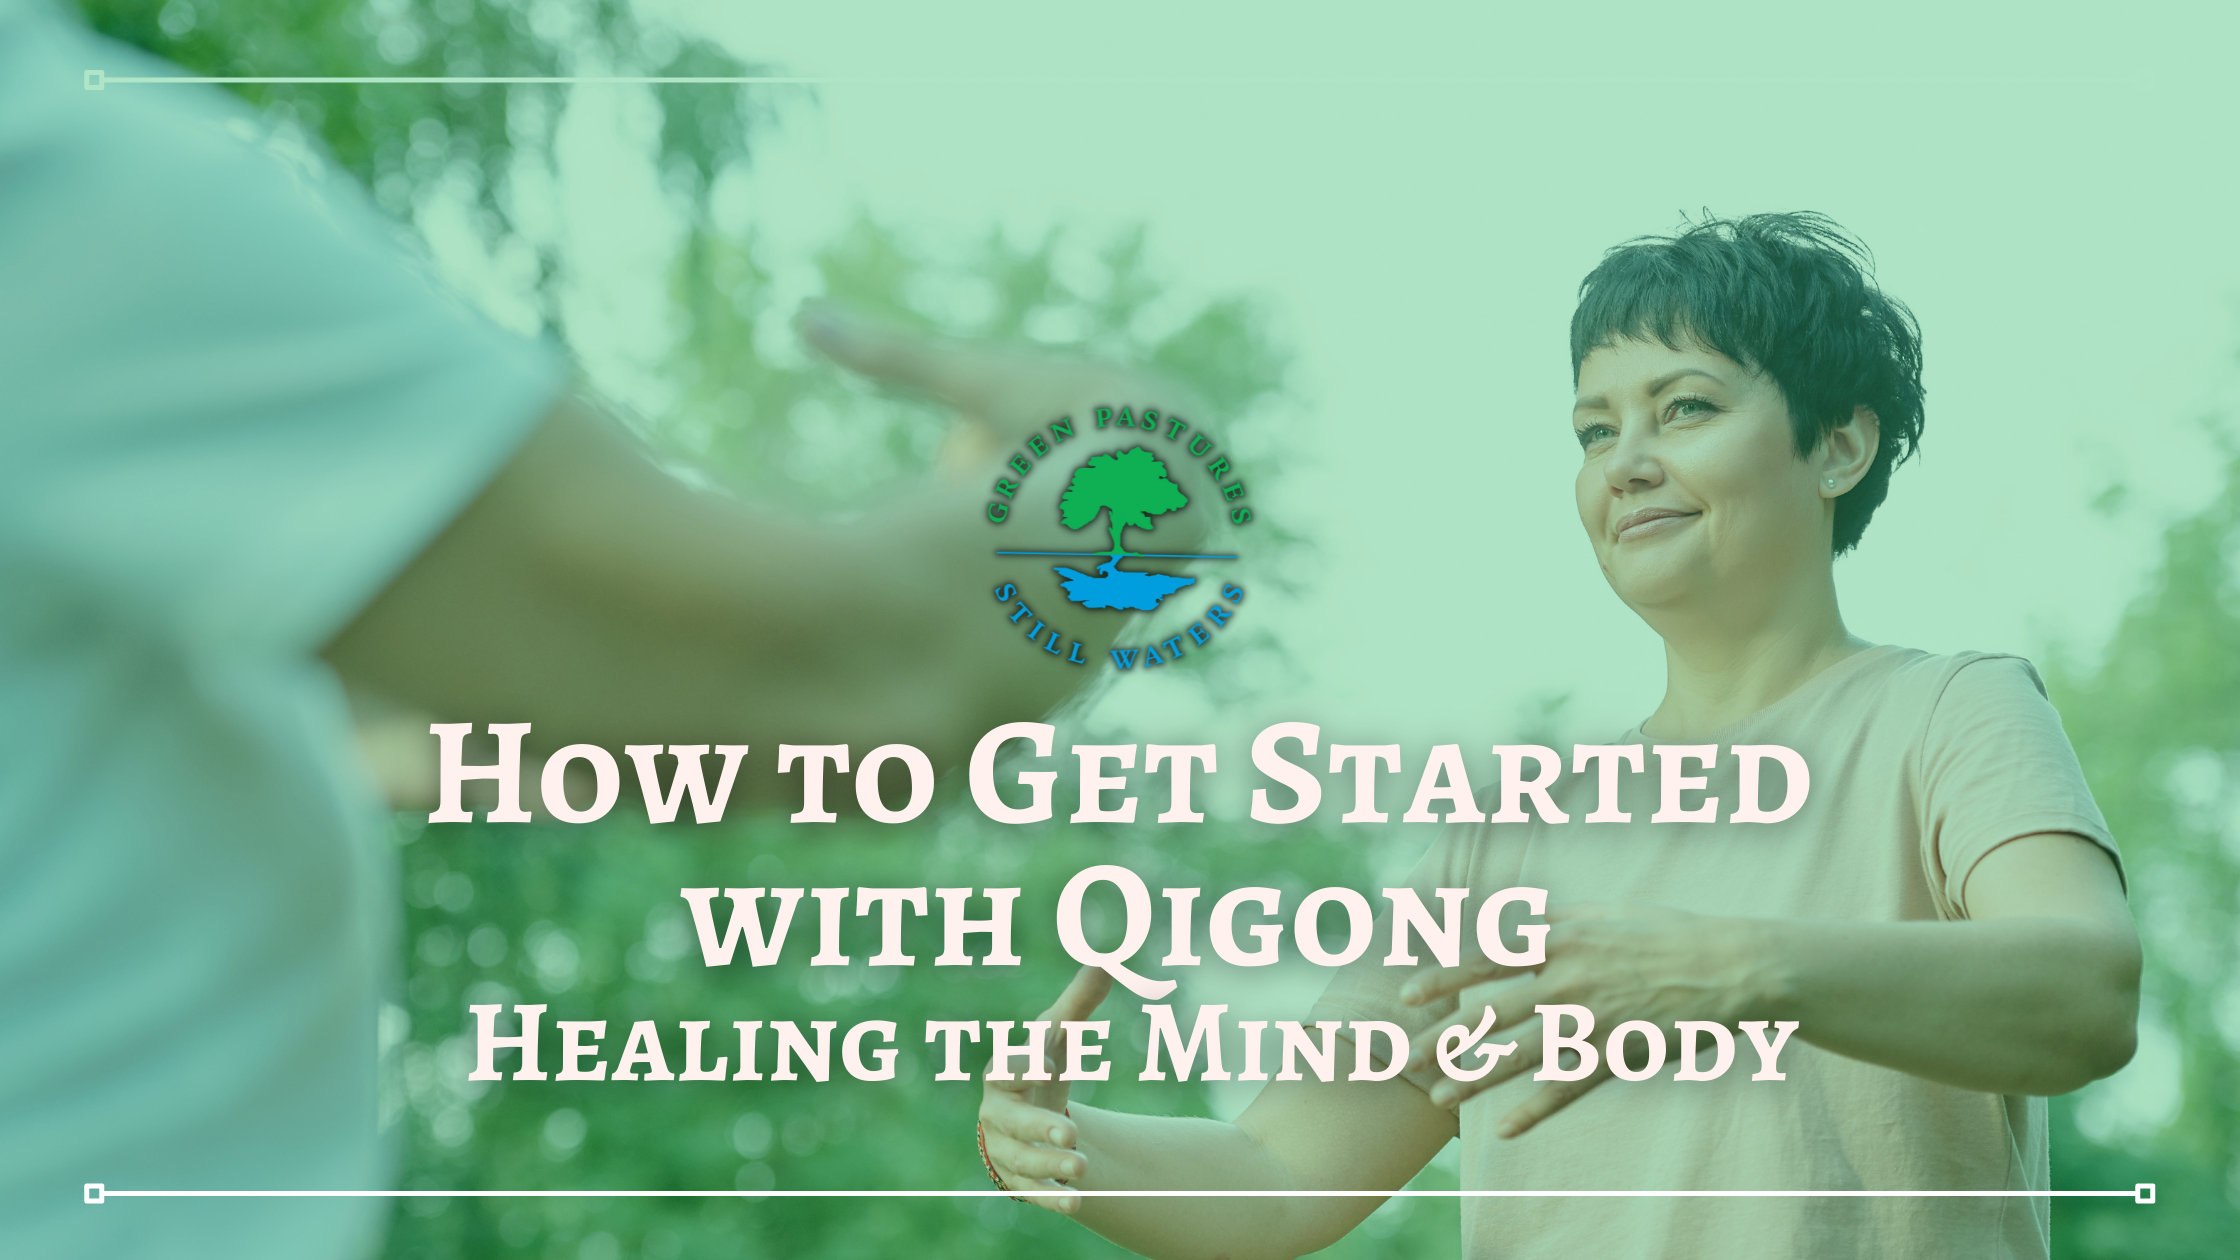 How to Get Started with Qigong – Healing the Mind & Body